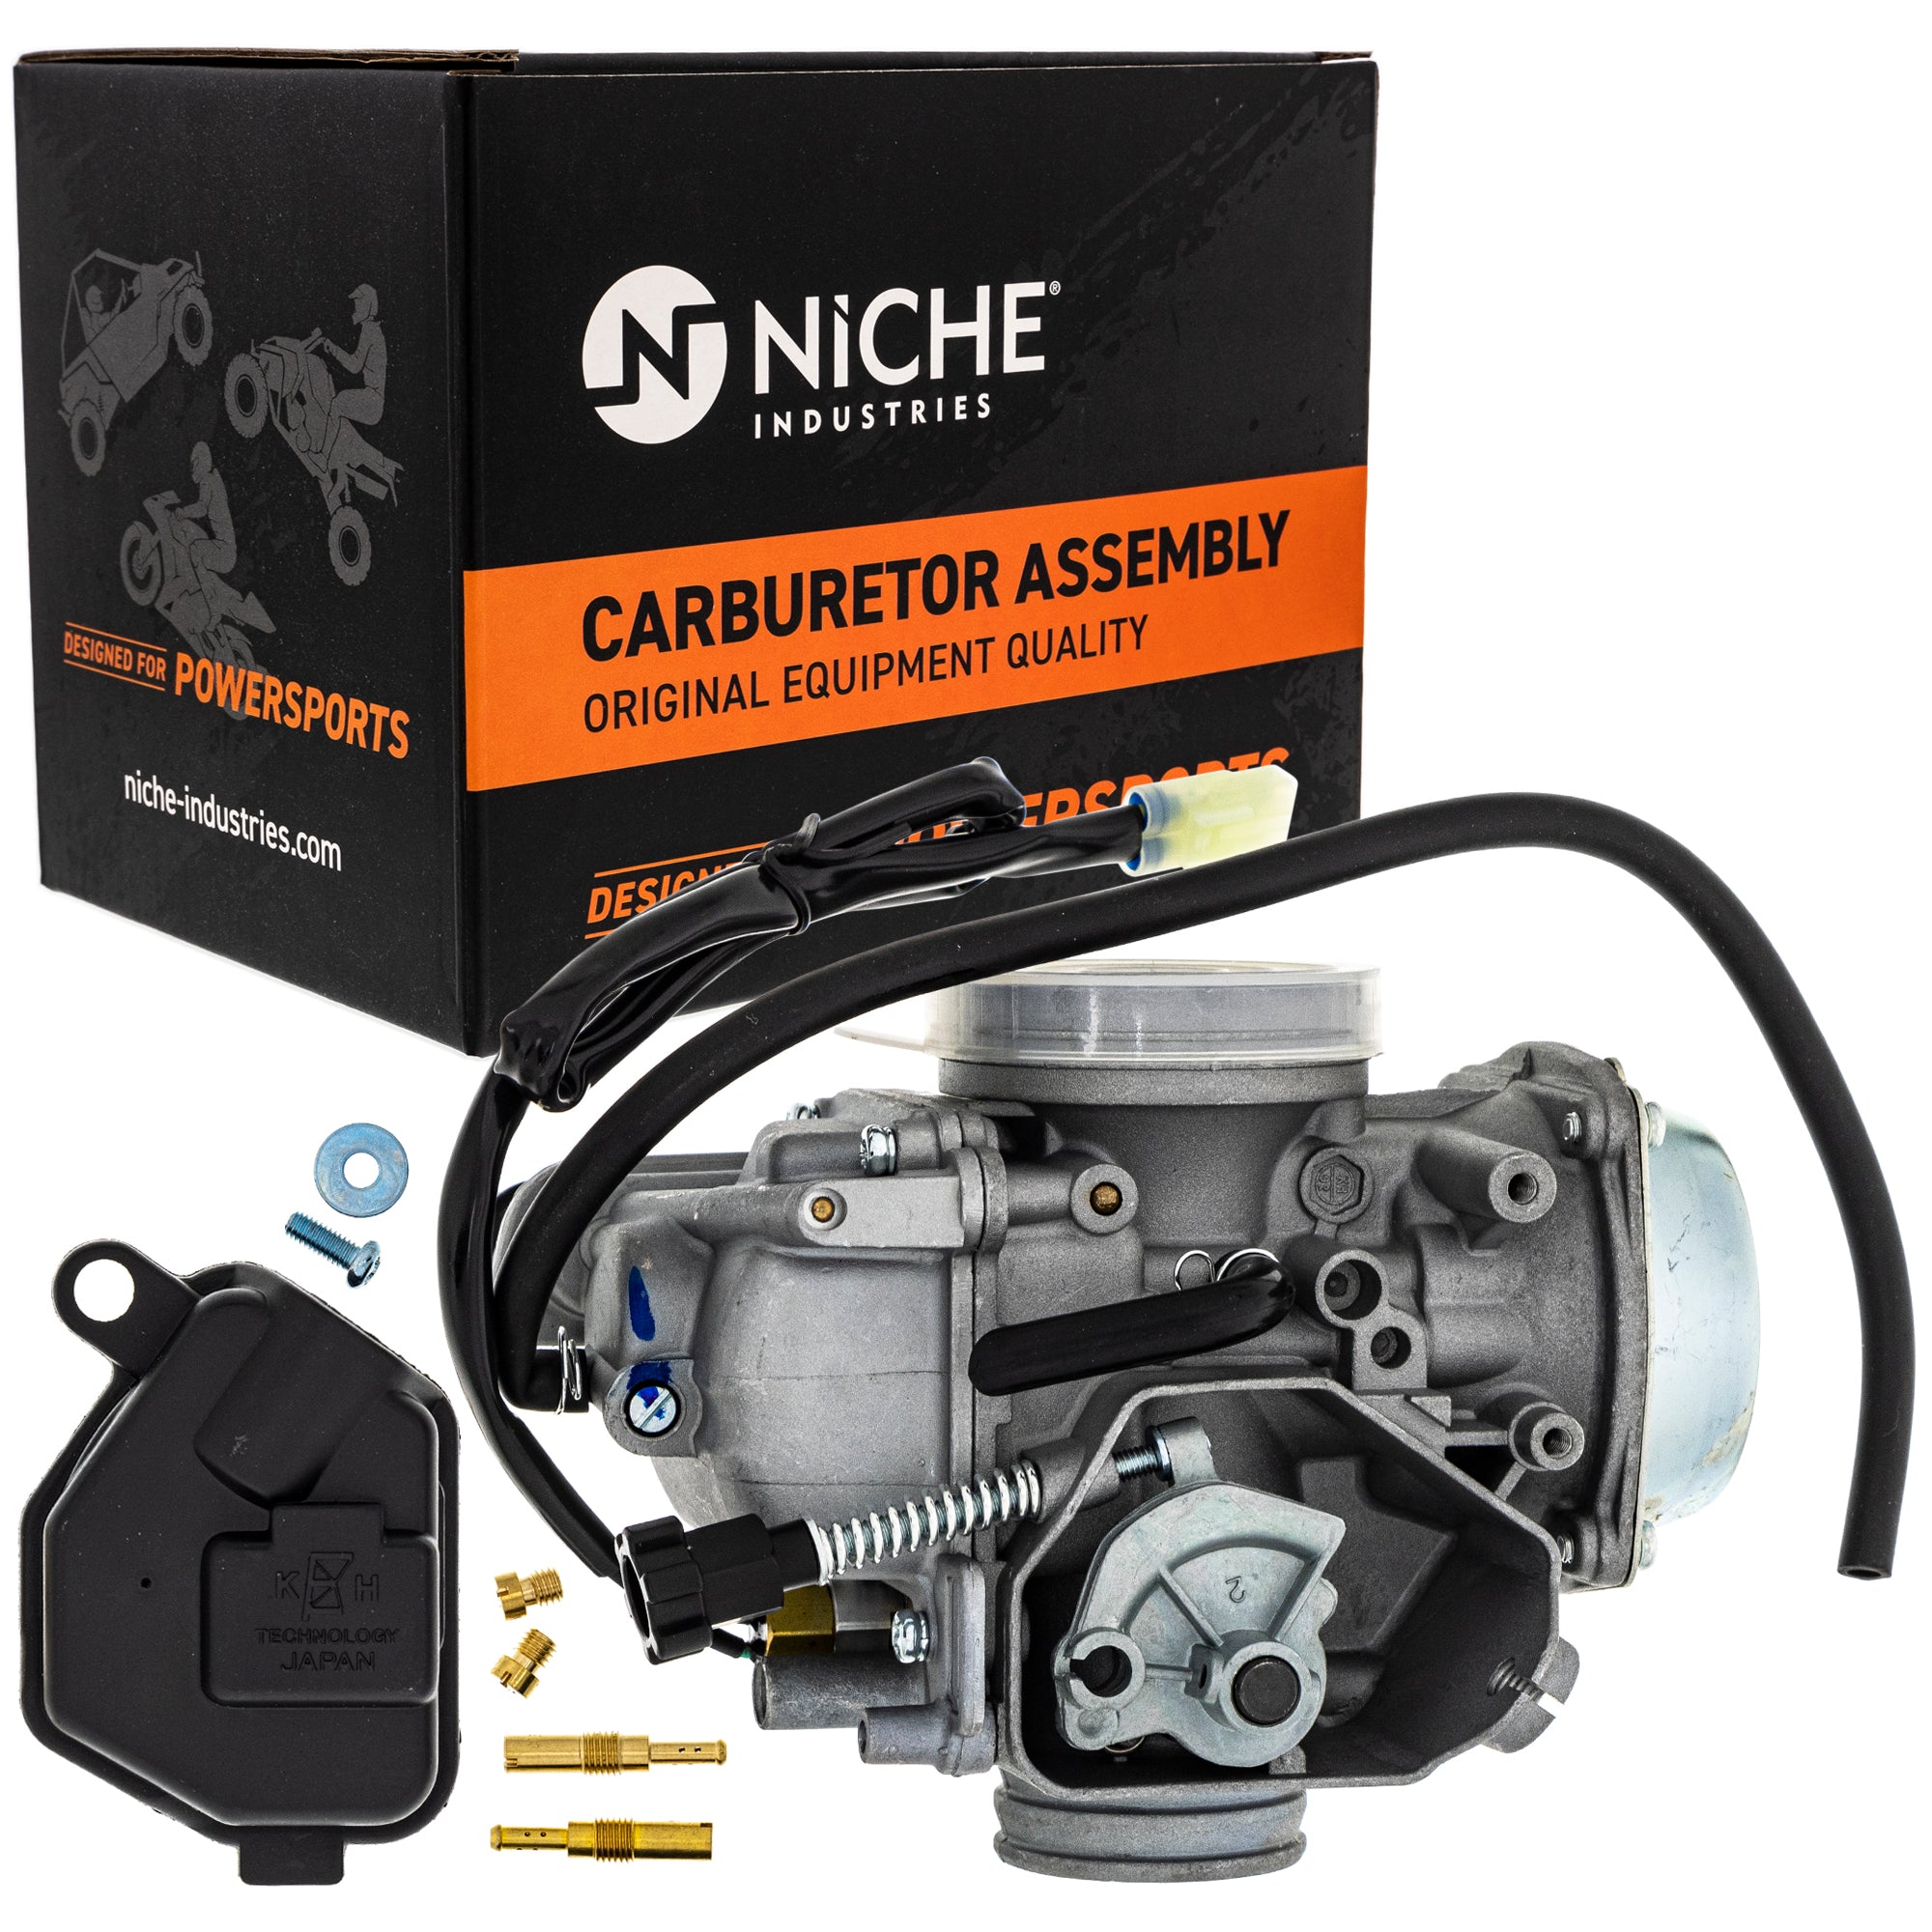 NICHE 519-KCR2233B Carburetor Assembly for zOTHER Honda FourTrax